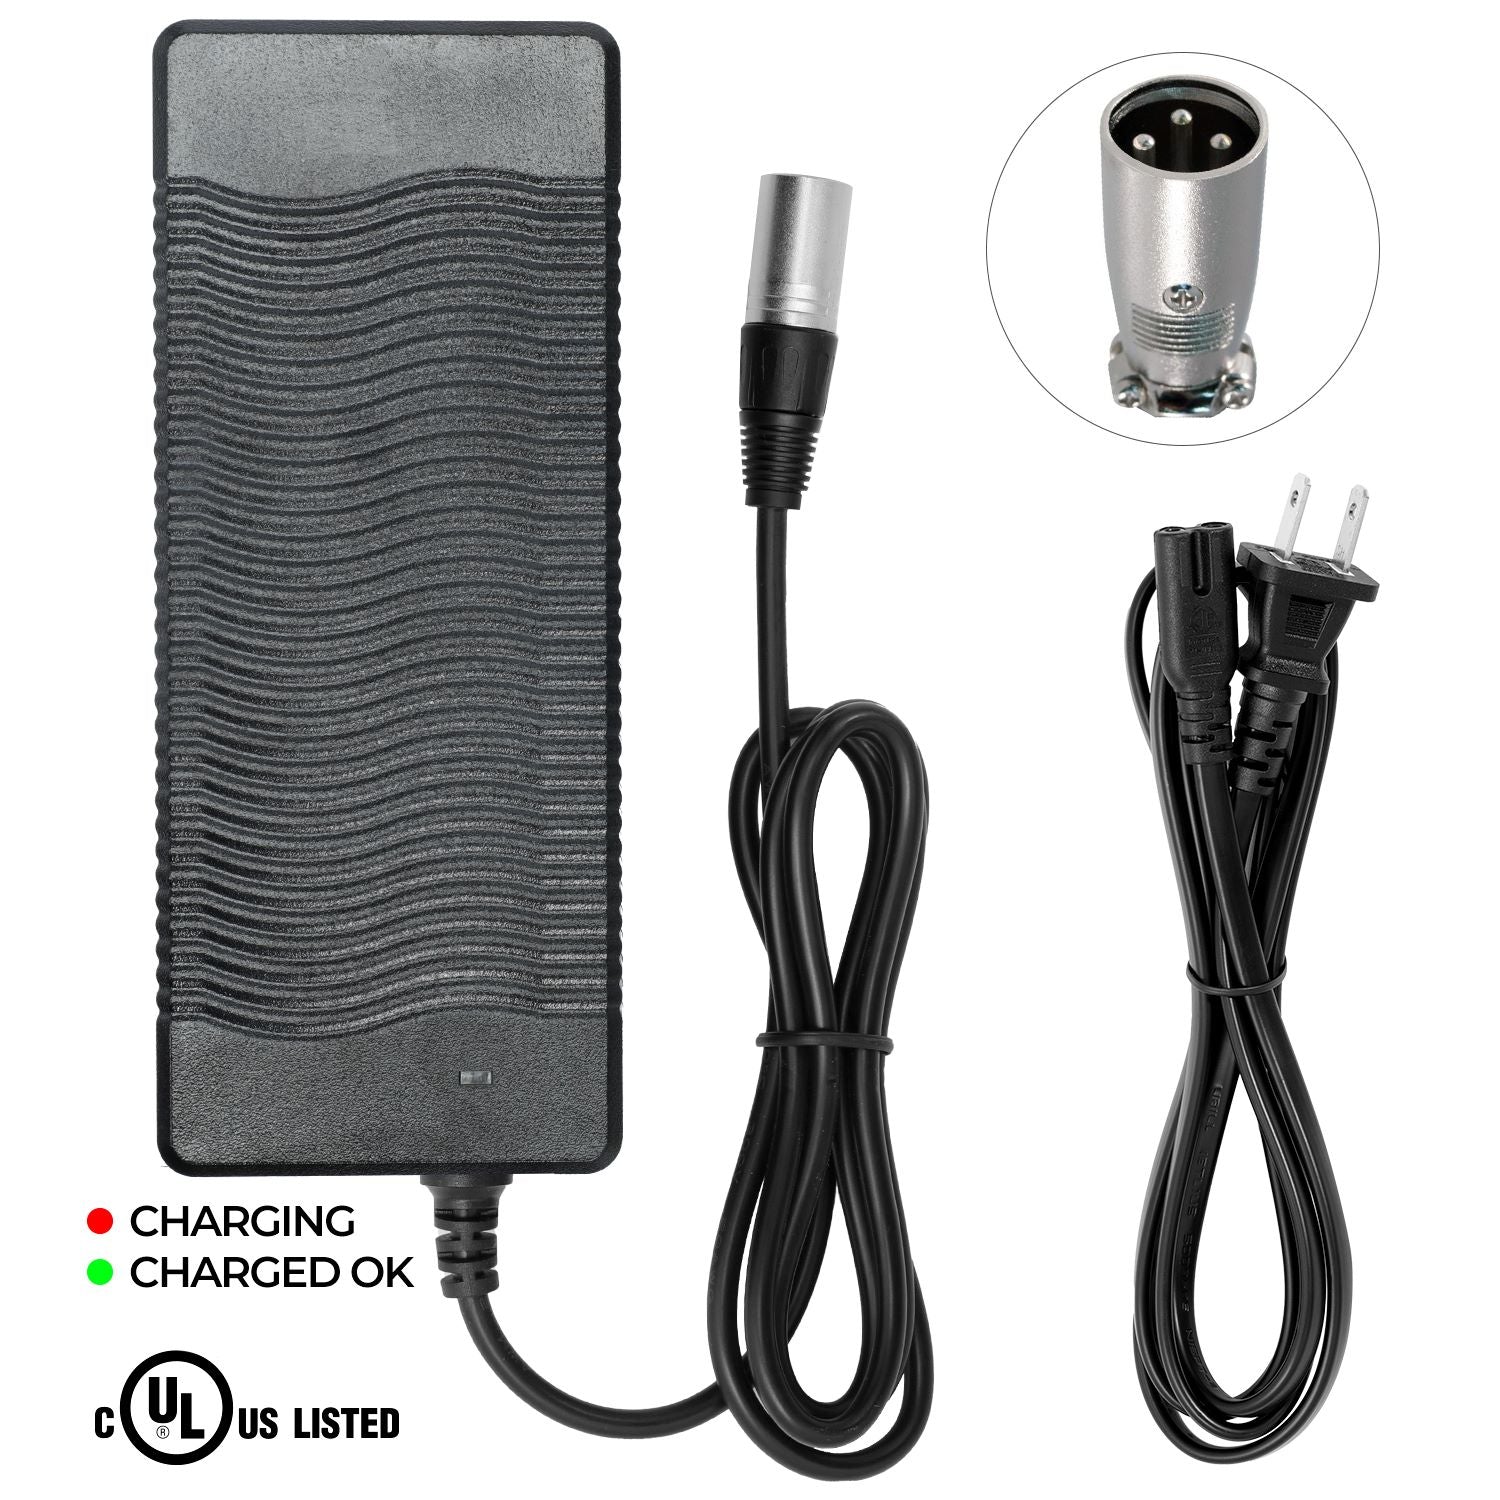 UL Listed Charger for Rad Power eBikes